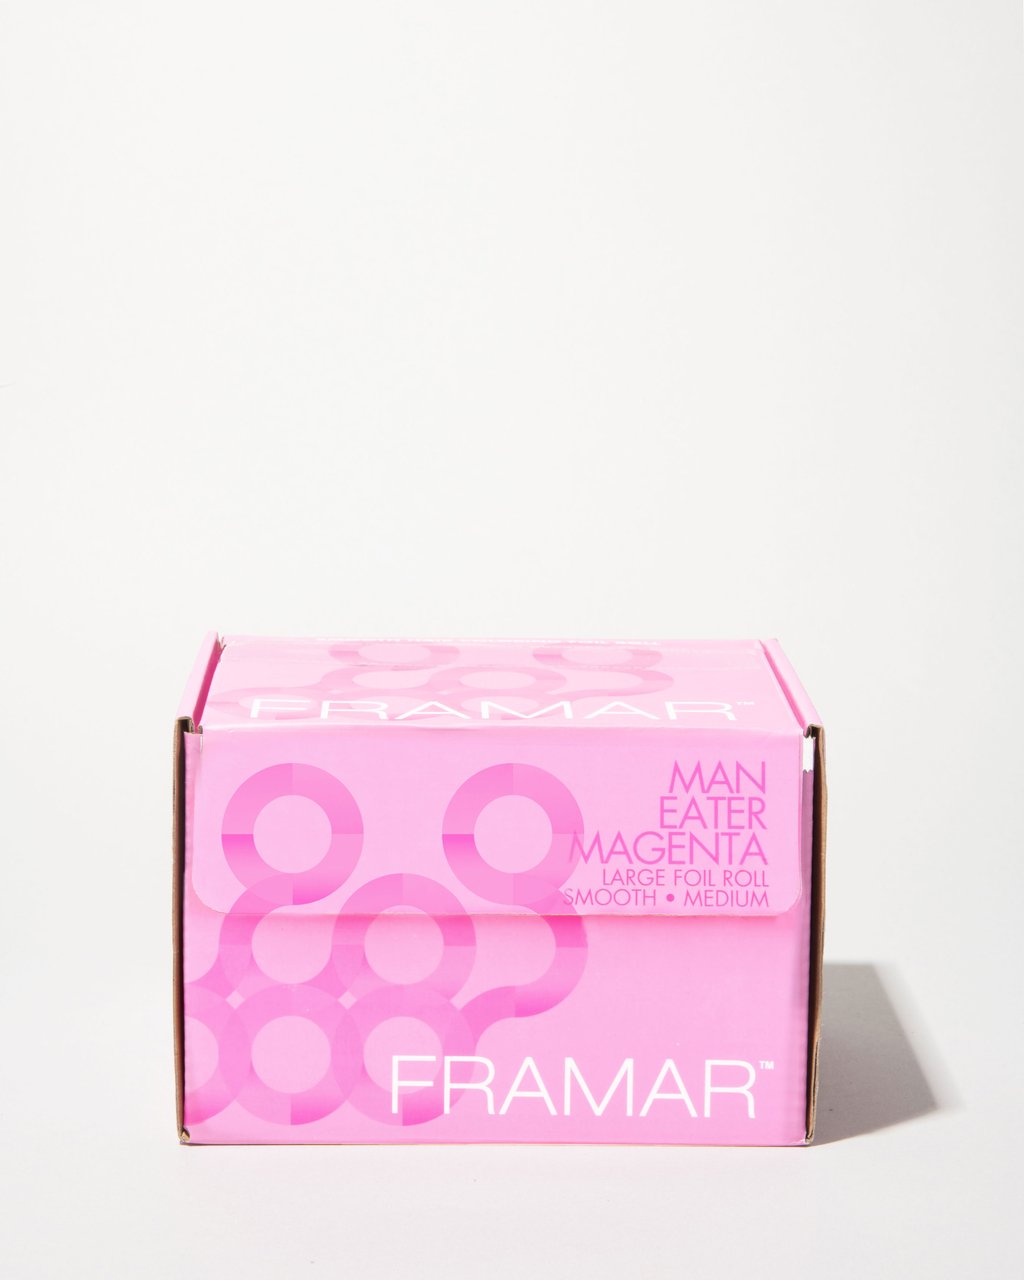 Framar Smooth Foil - Man-Eater Magenta (Medium) - Large Roll - Creata Beauty - Professional Beauty Products